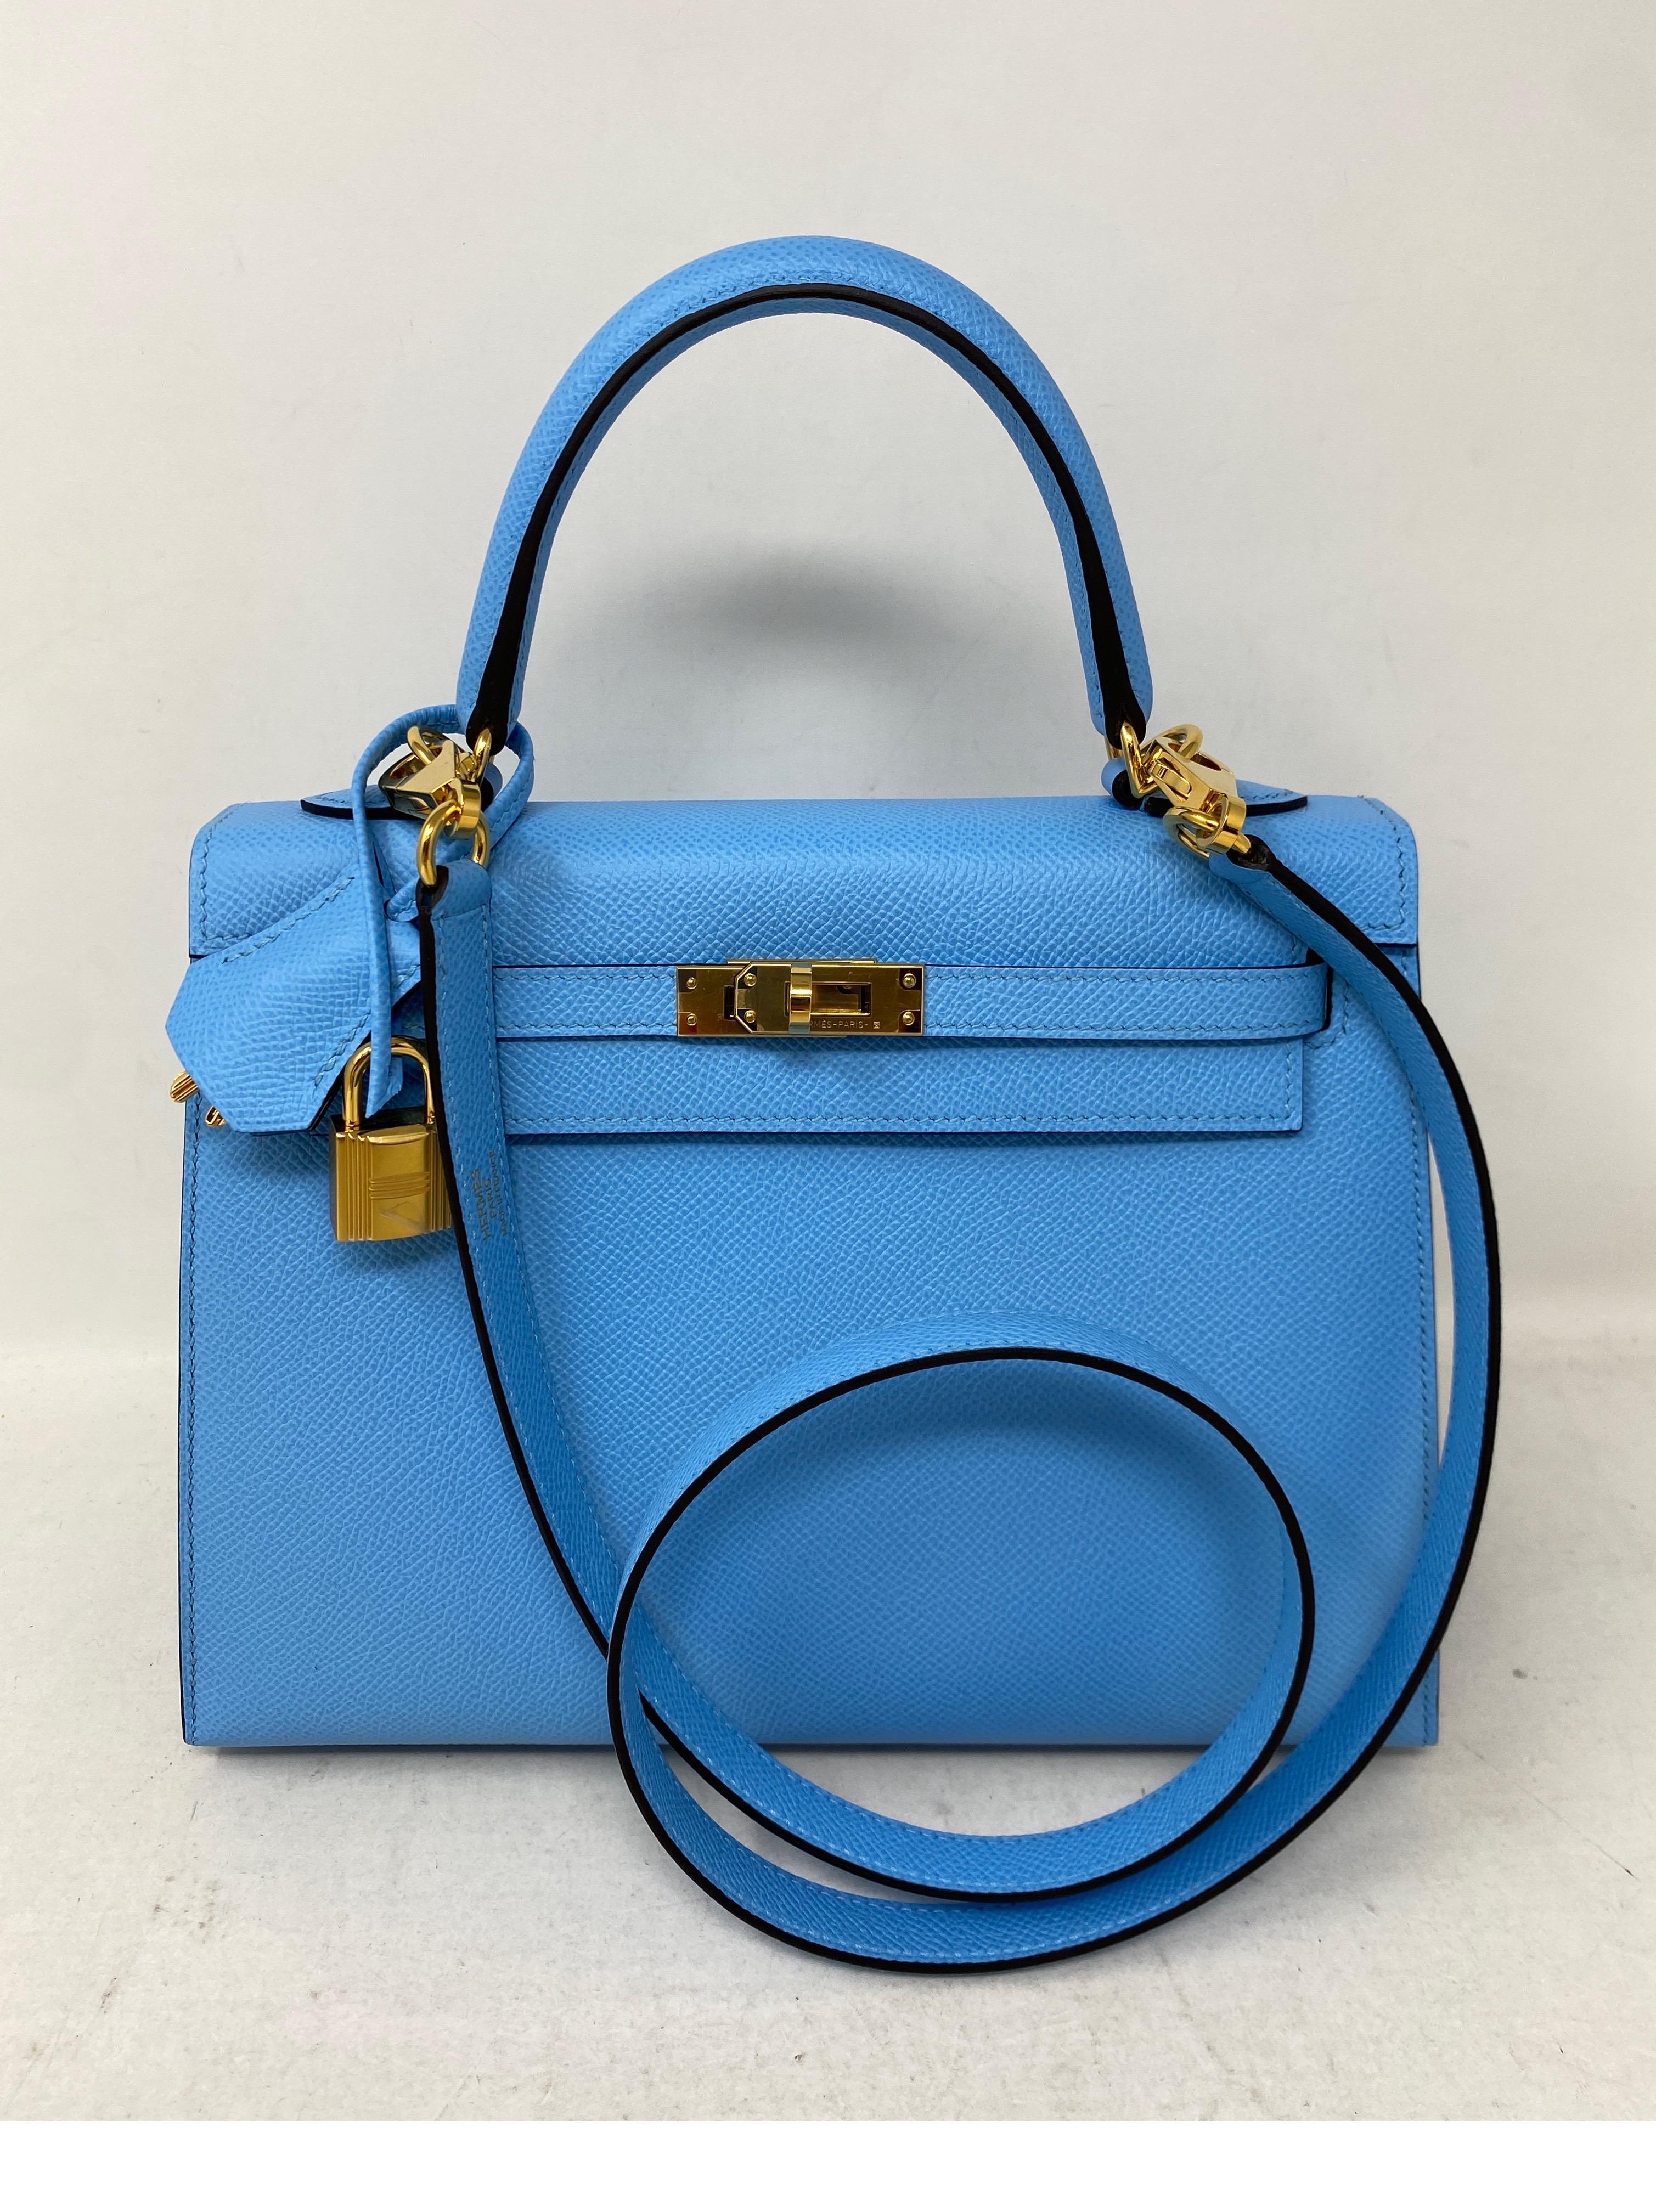 Hermes Celeste Kelly 25 Bag. Gold hardware. Excellent condition. New Kelly 25 Bag. Epsom leather and sellier. Rare size and color. Includes clochette, lock, keys, and dust bag. Guaranteed authentic. 